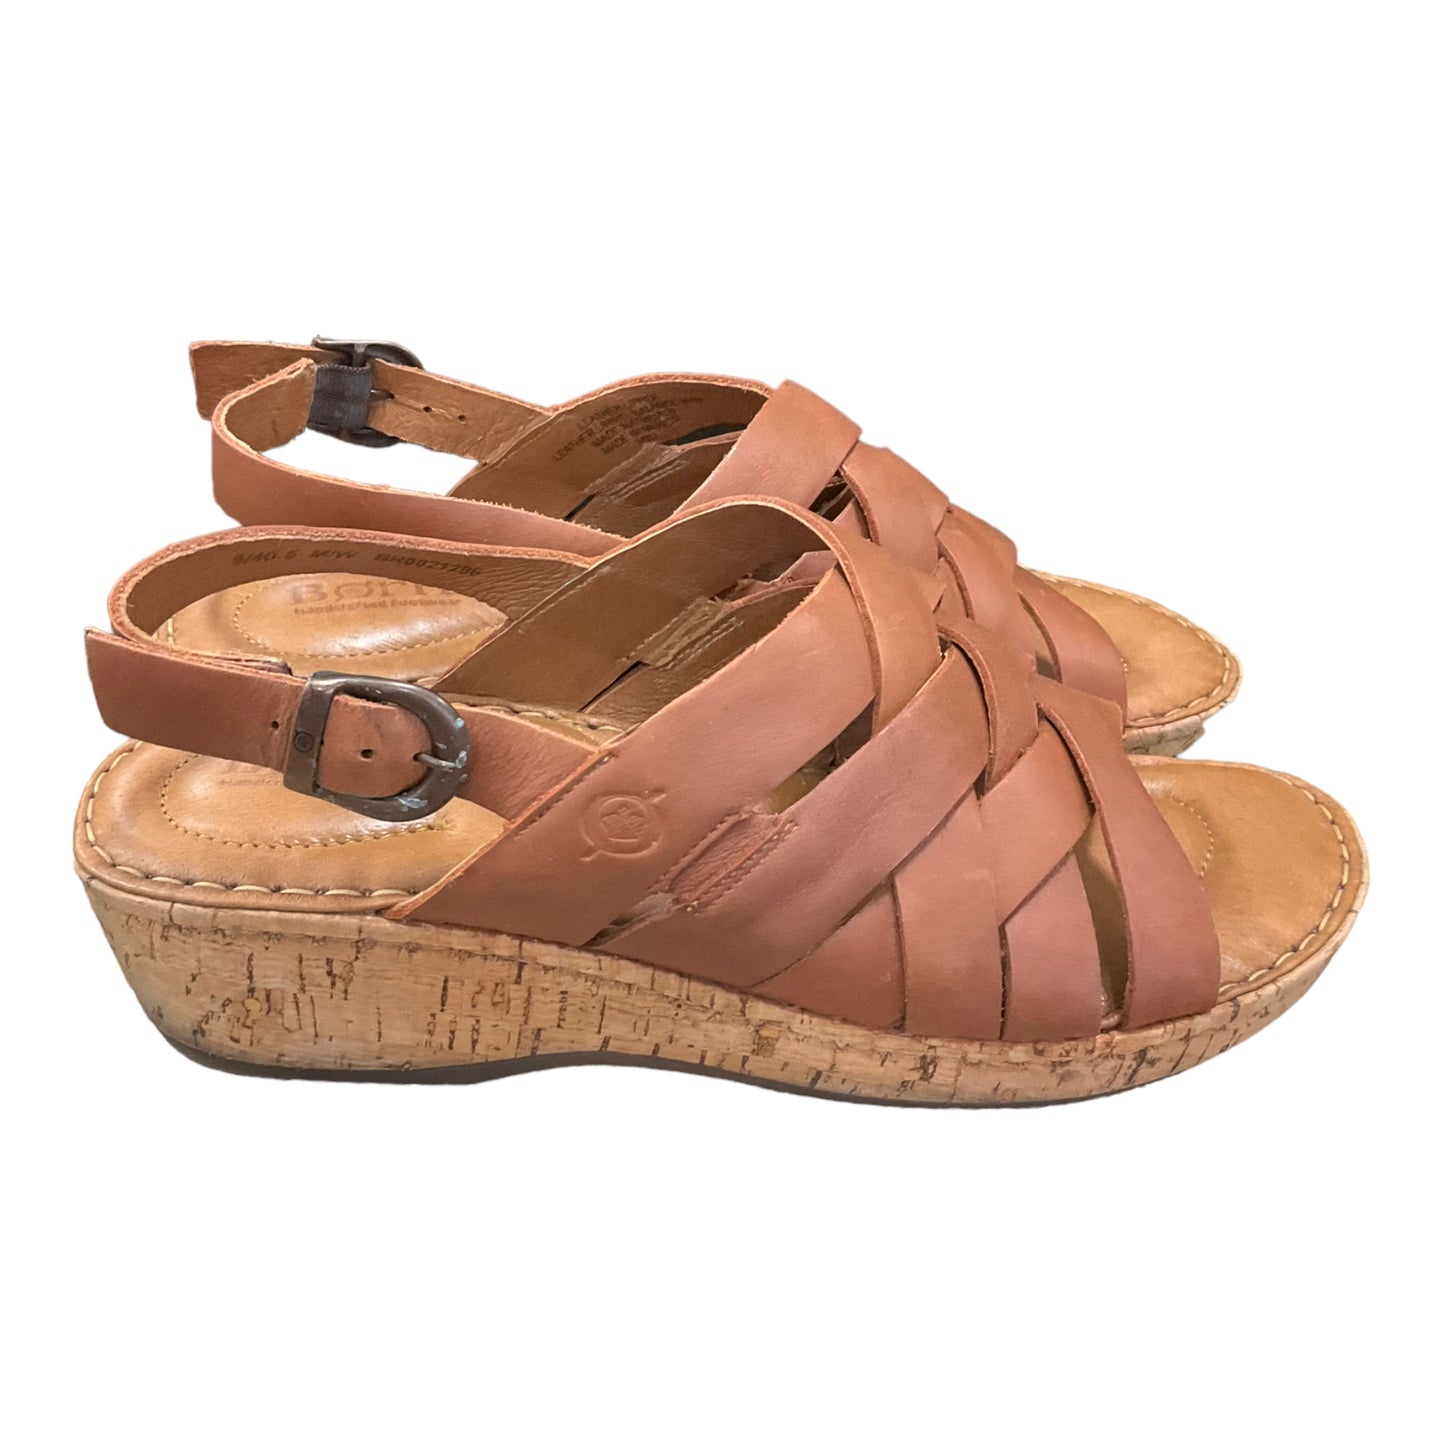 Sandals Heels Wedge By Born  Size: 9.5